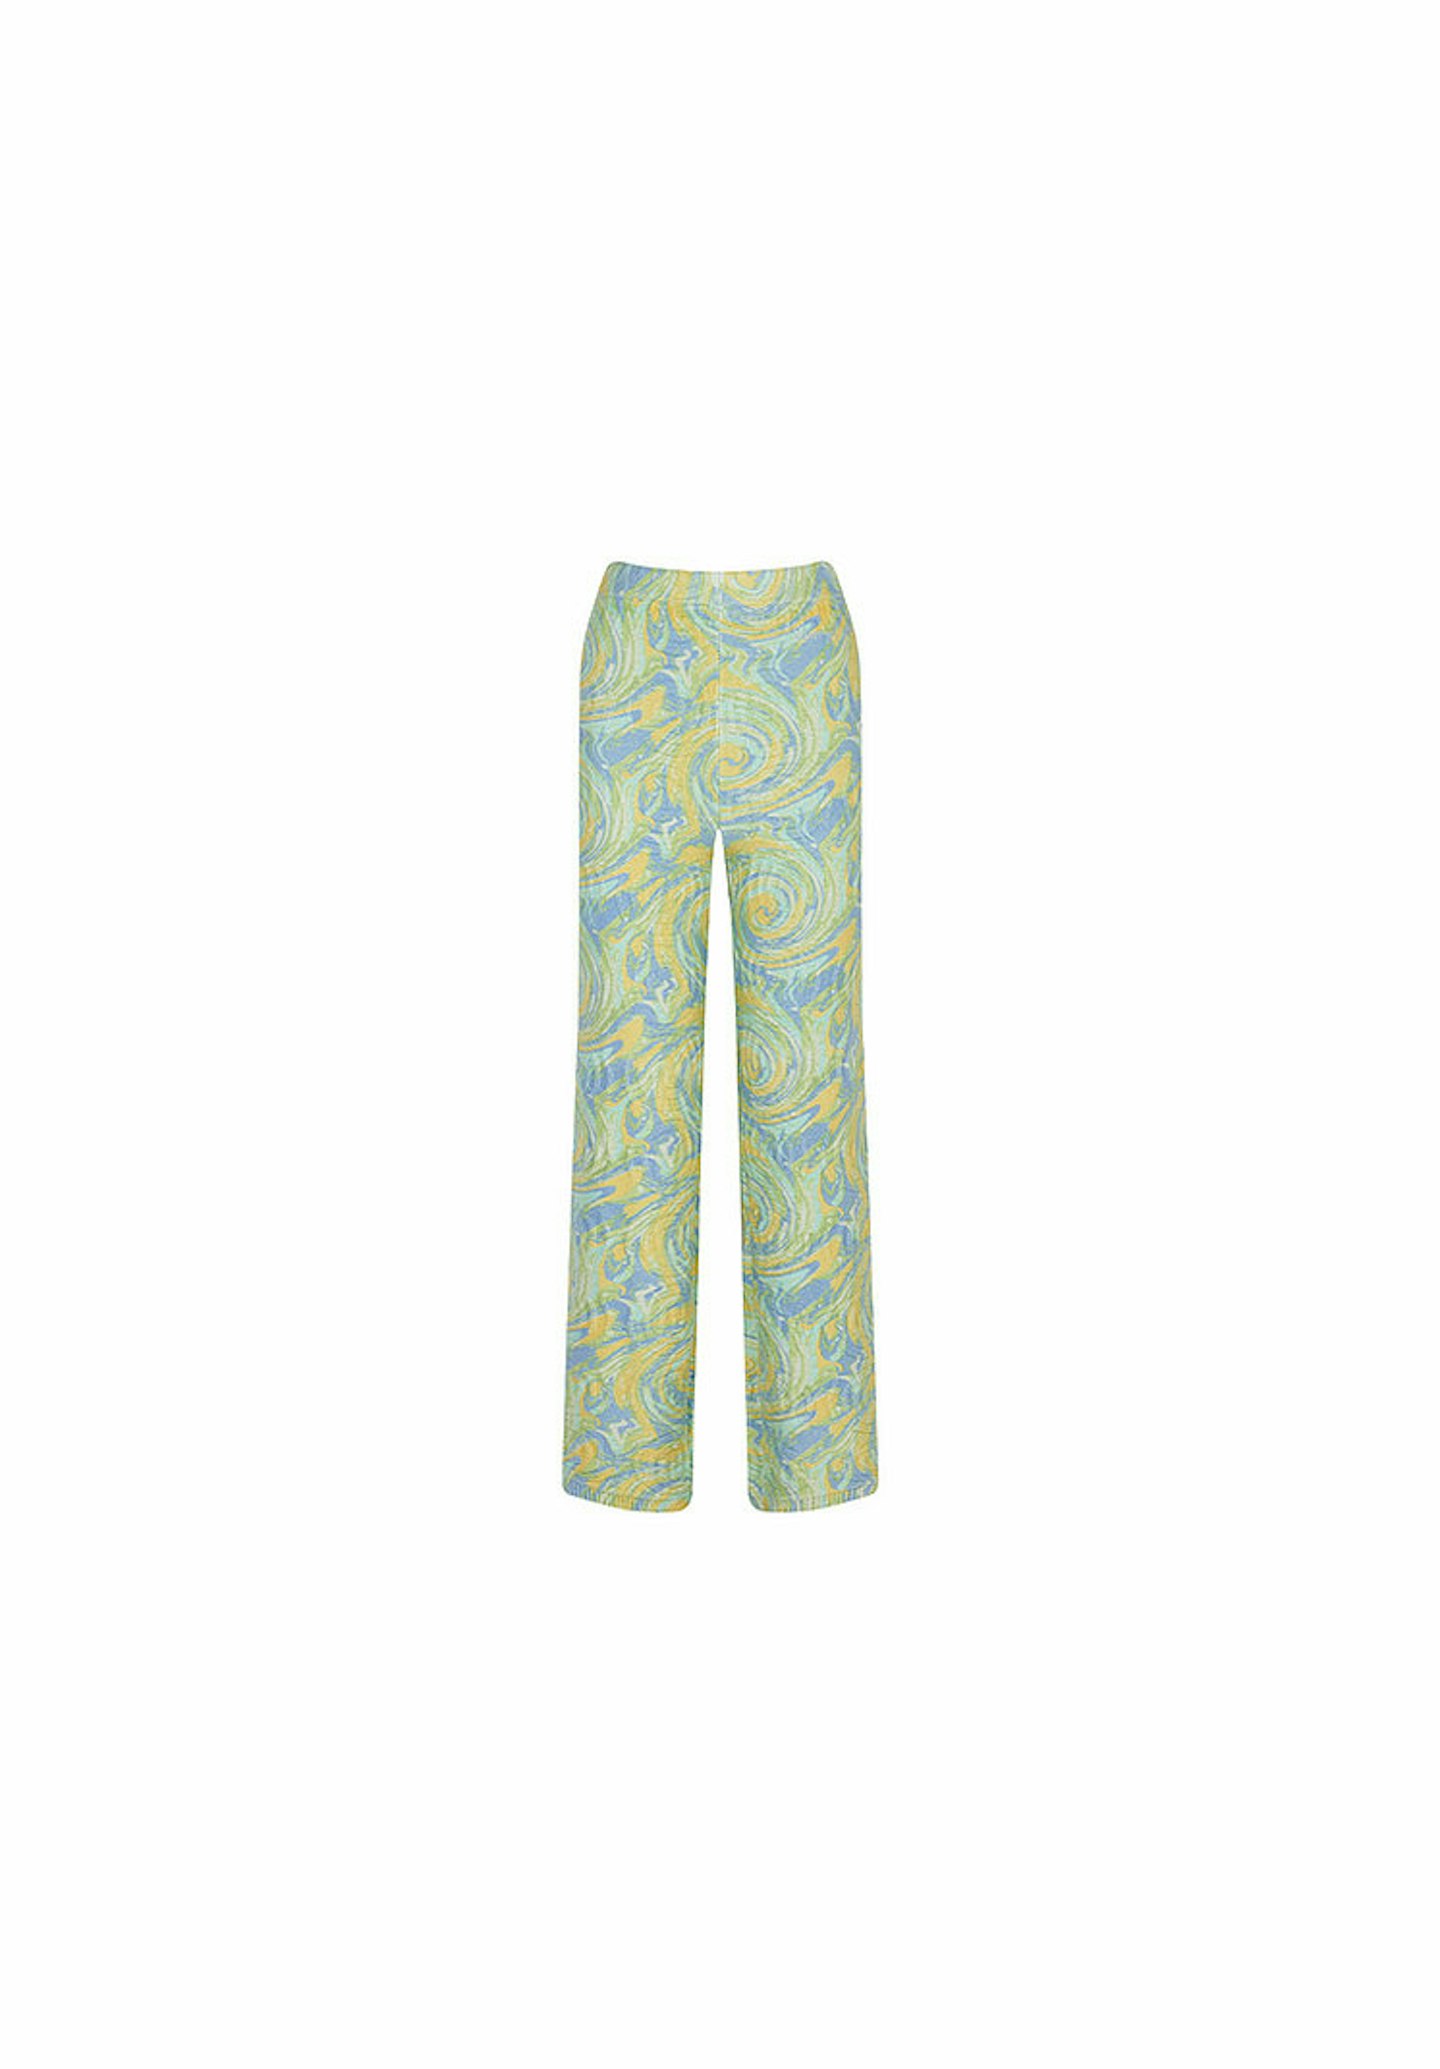 House of Sunny, Cypress Pants, £79.20